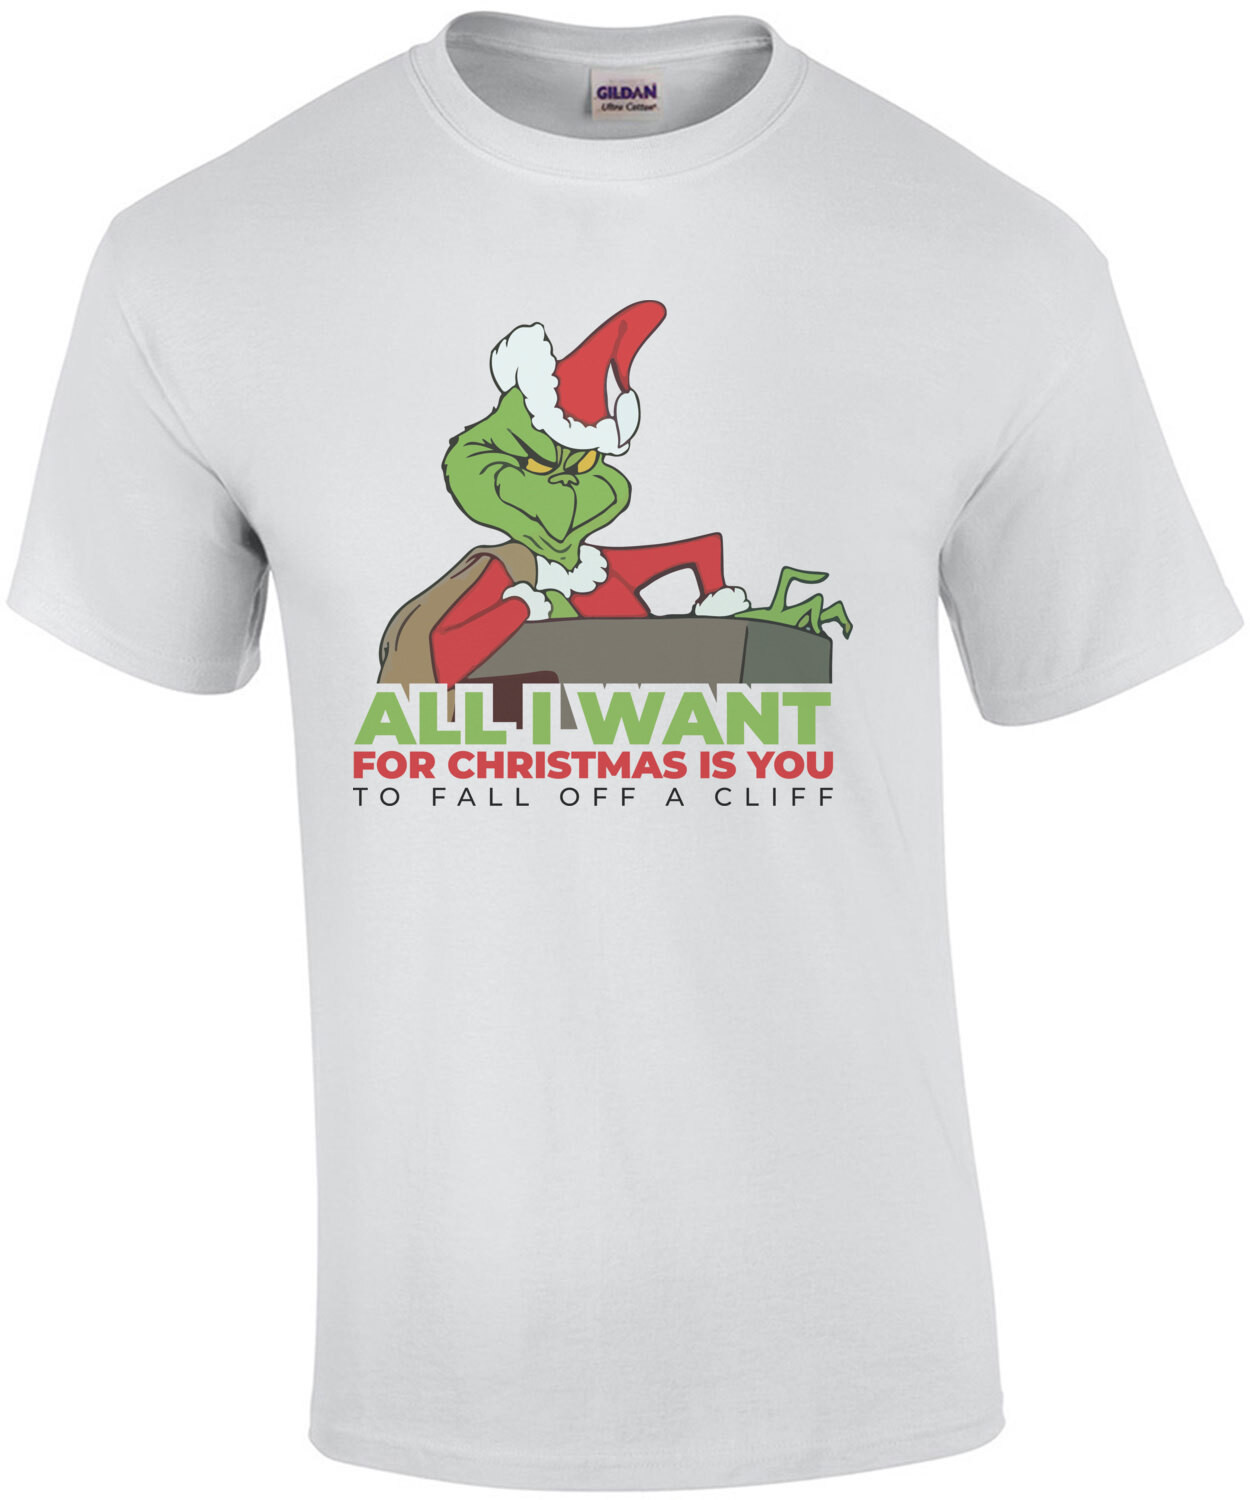 All I want for Christmas is you - to fall off a cliff - grinch - Mariah Carey Parody - funny Christmas T-Shirt